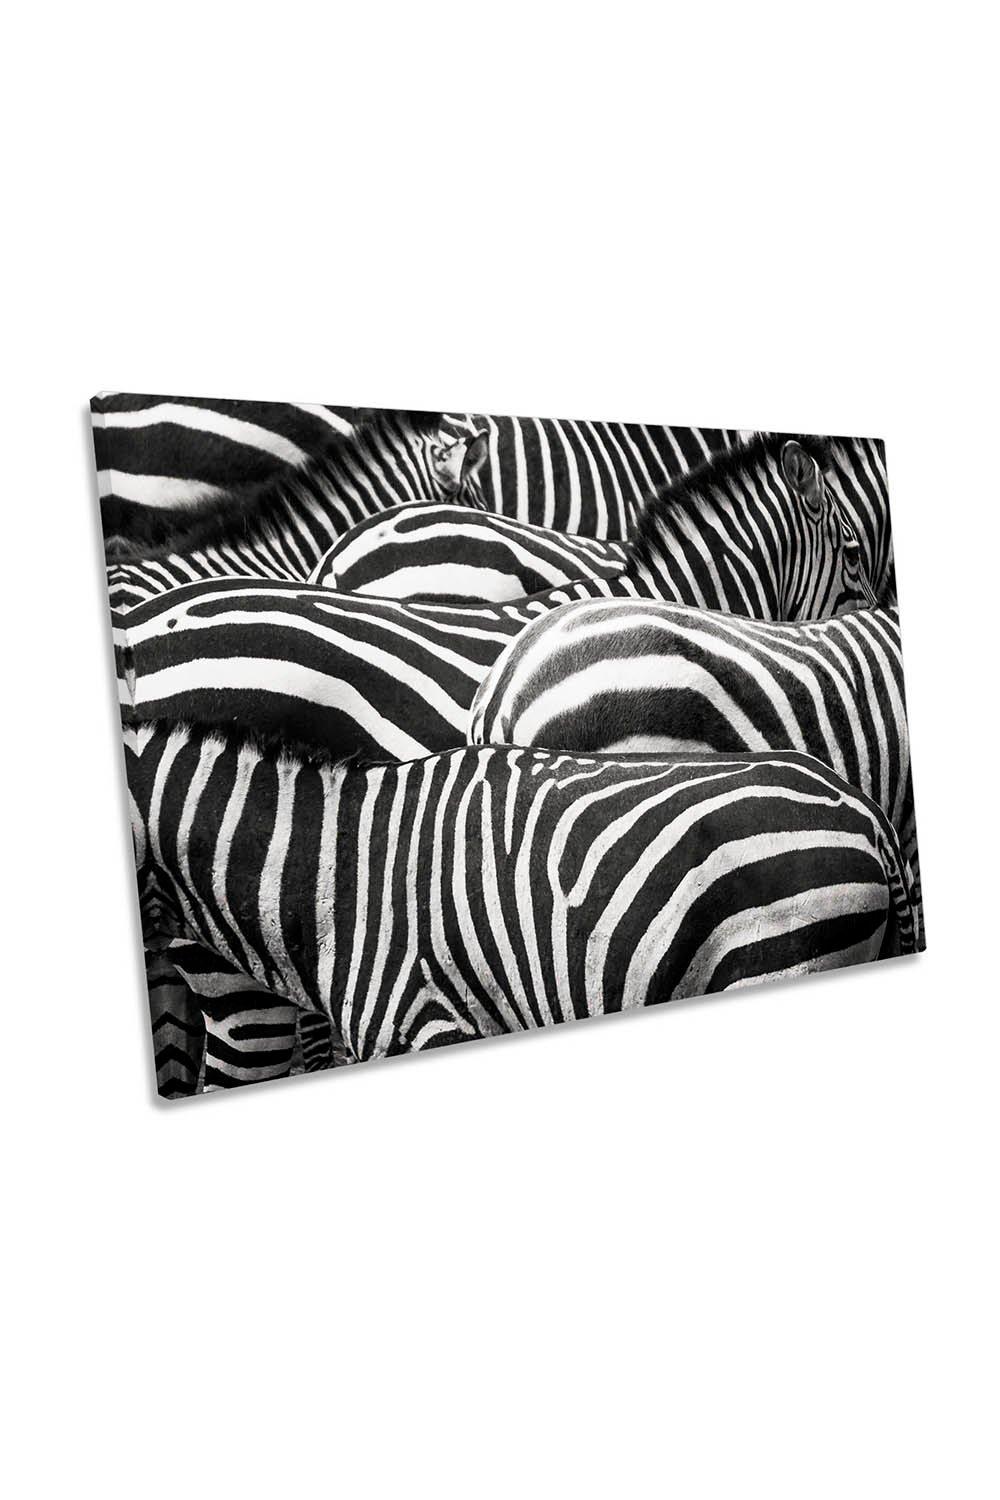 Zebras Together Wildlife Canvas Wall Art Picture Print